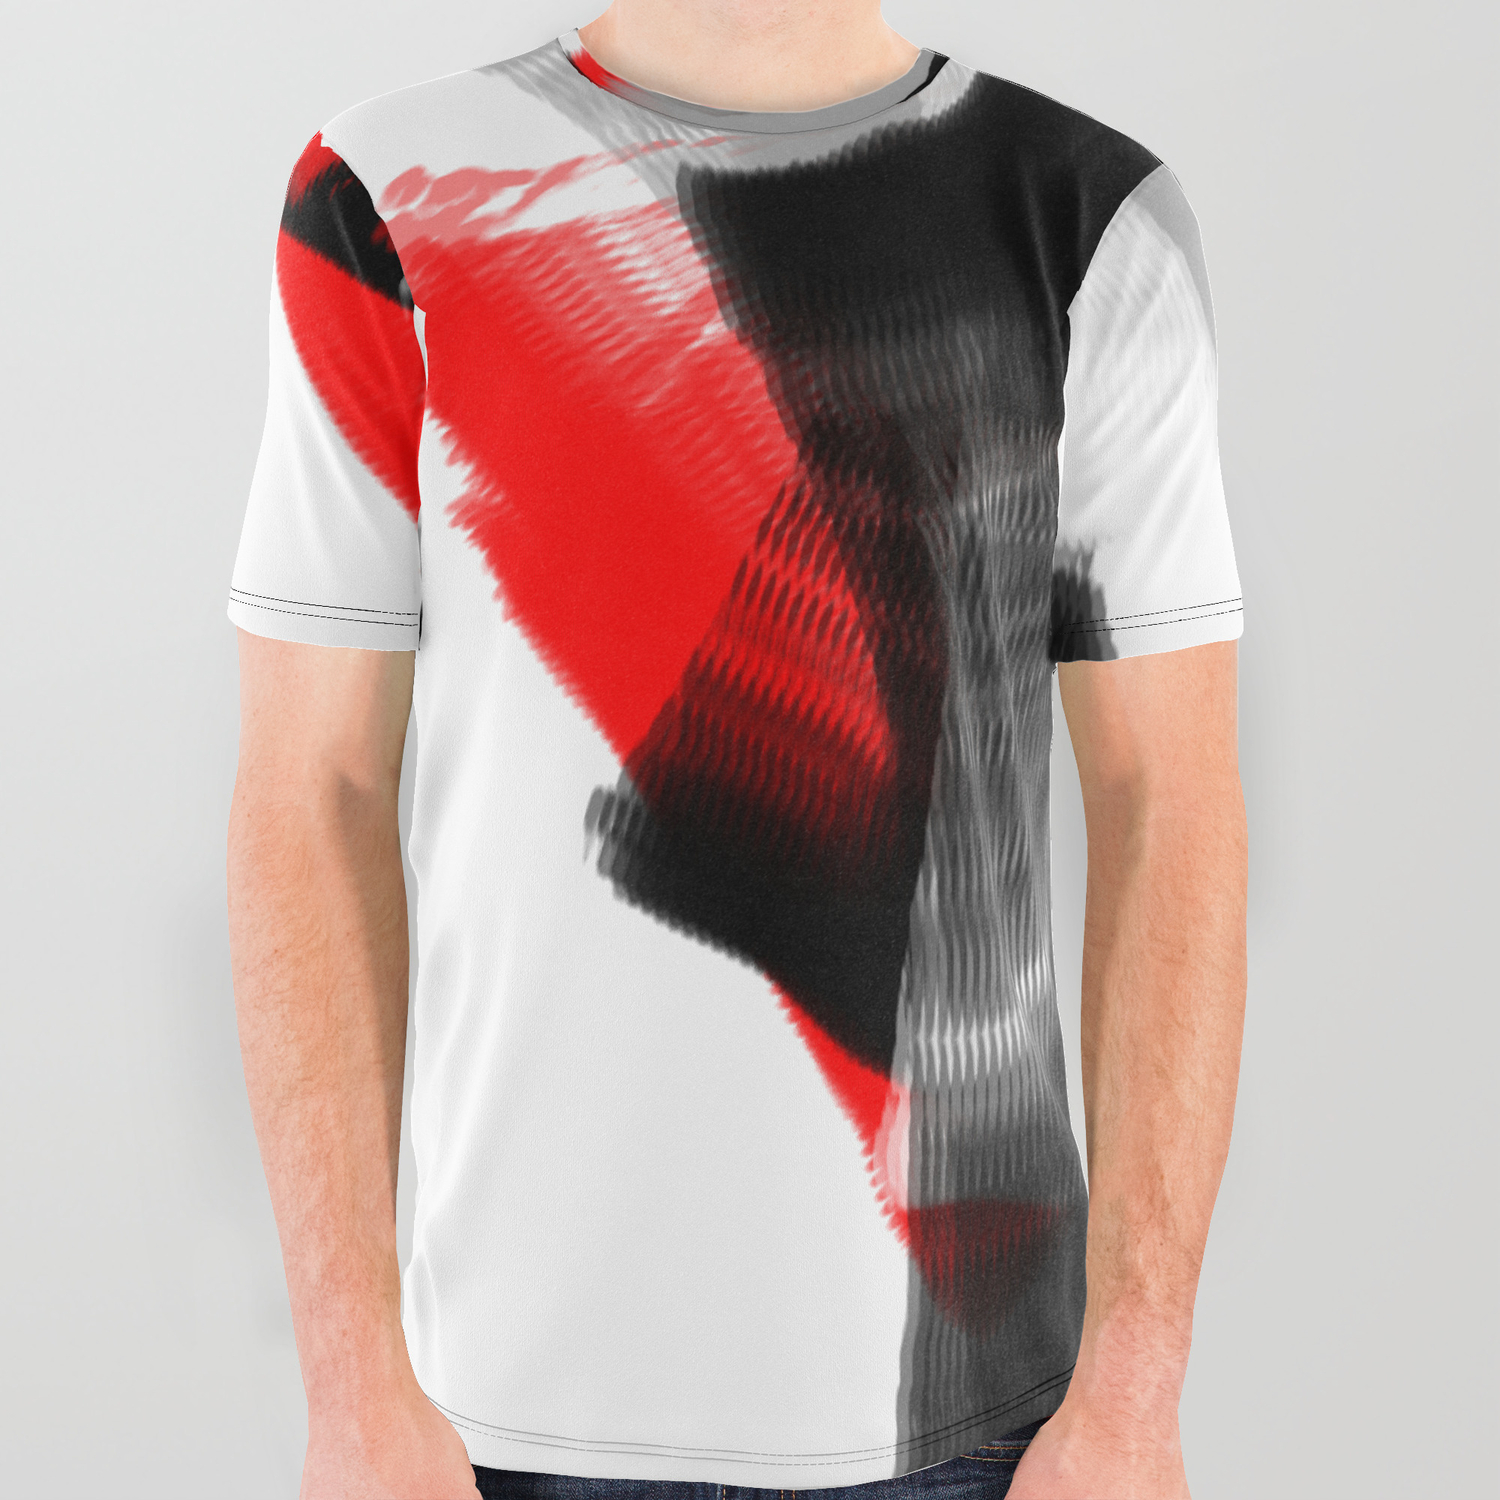 white & red graphic tee